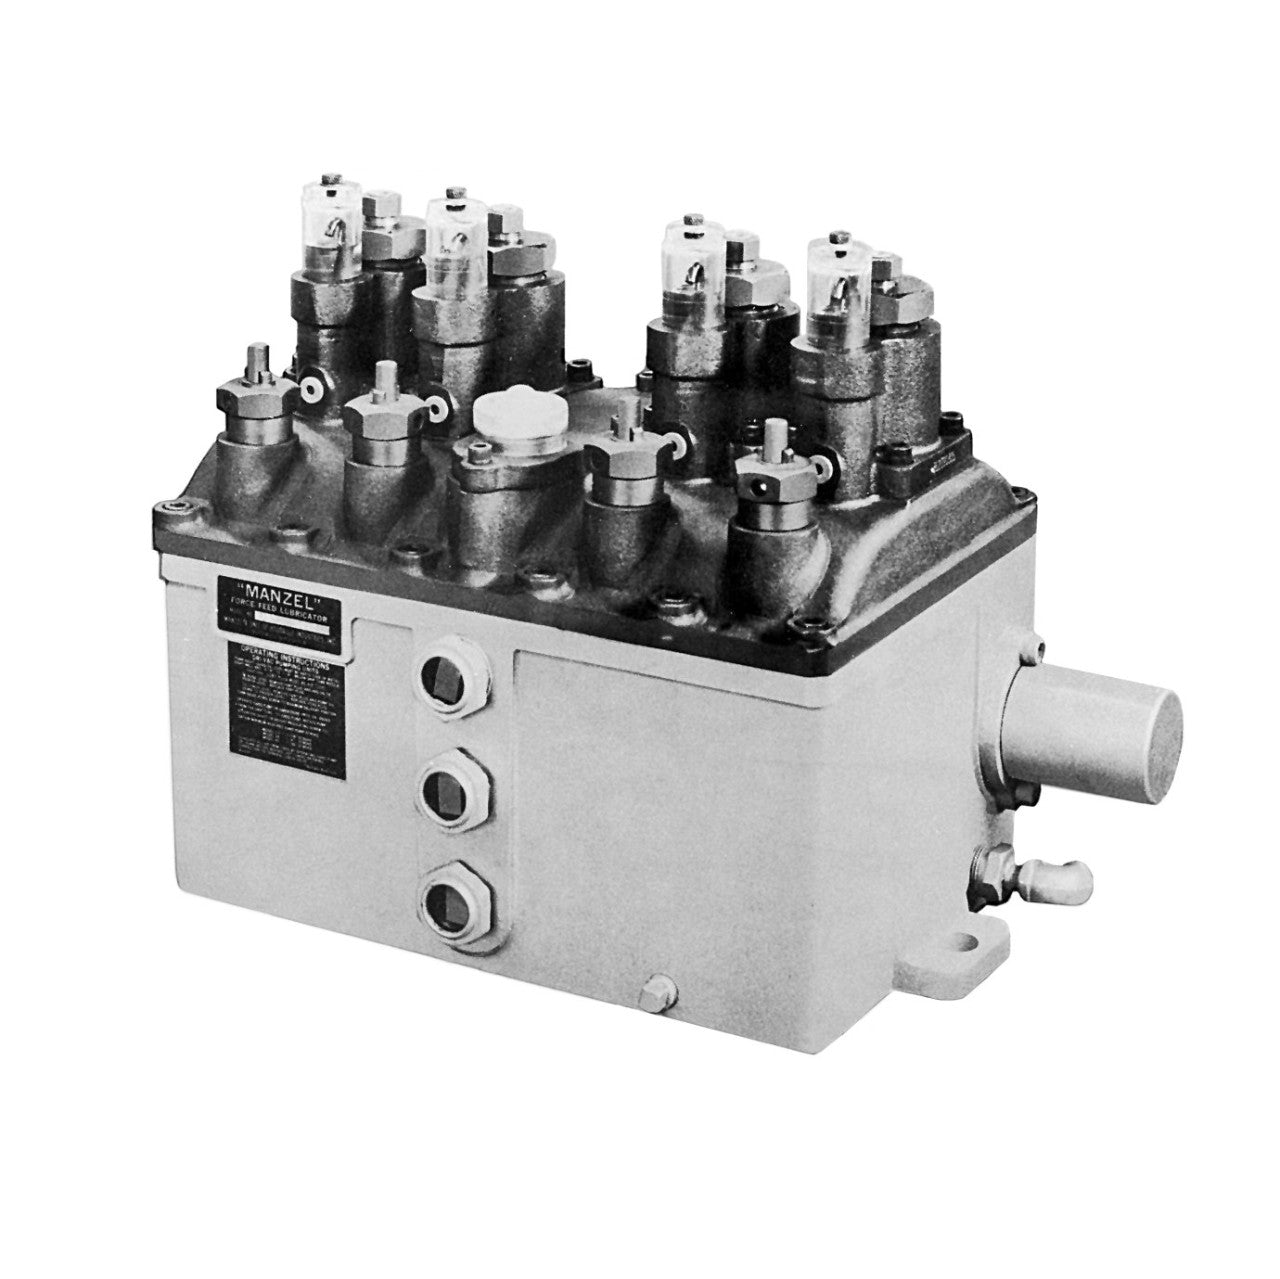 HP-15 6 Feed Gear Box with 6 HP-15 Pumps